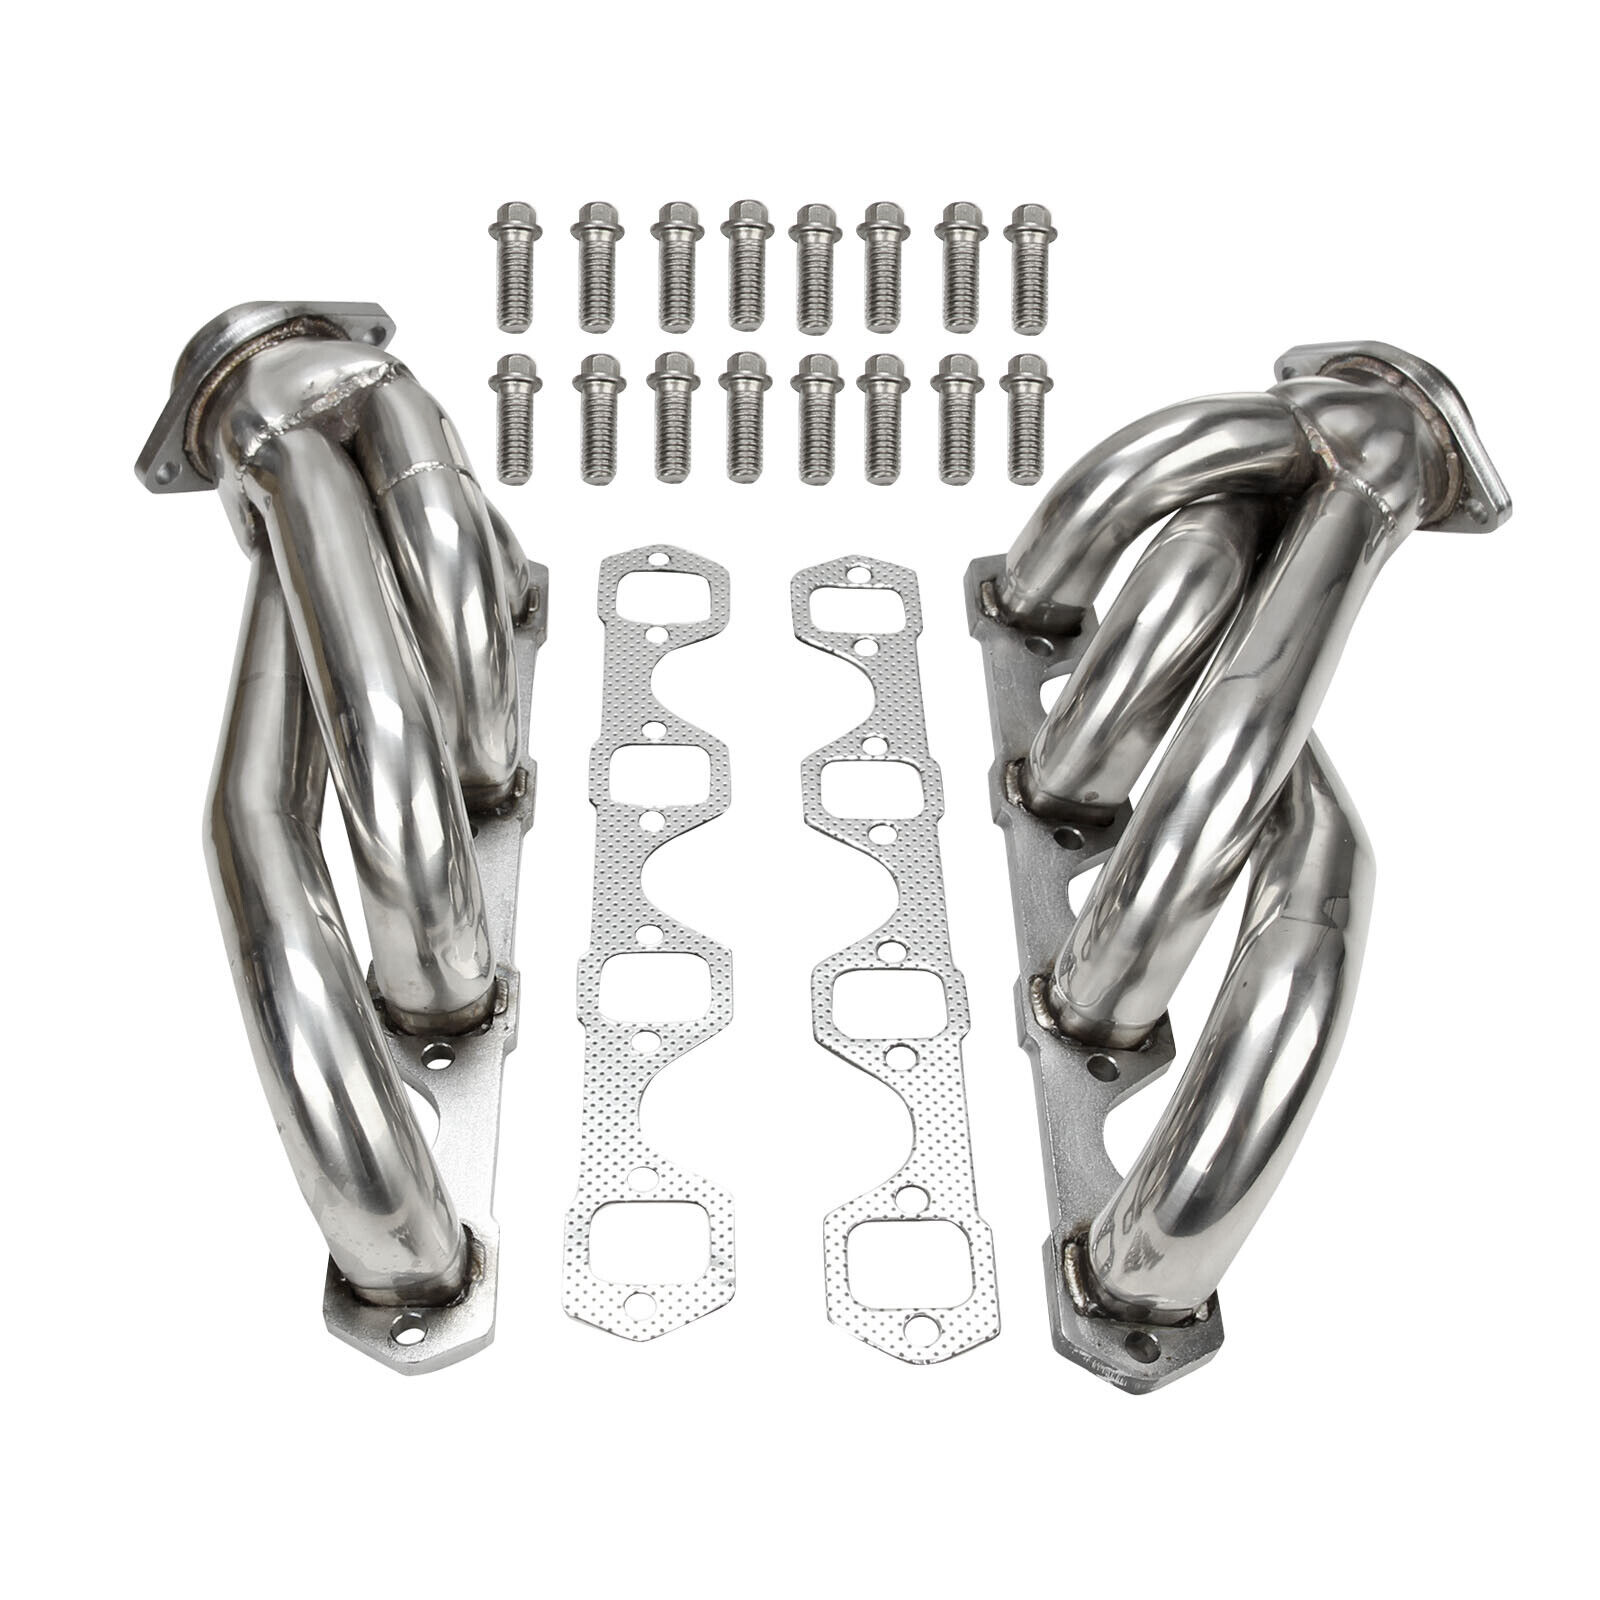 Stainless steel Exhaust Manifold Headers Fits 1979-1993 Mustang 5.0 V8 GT/LX/SVT